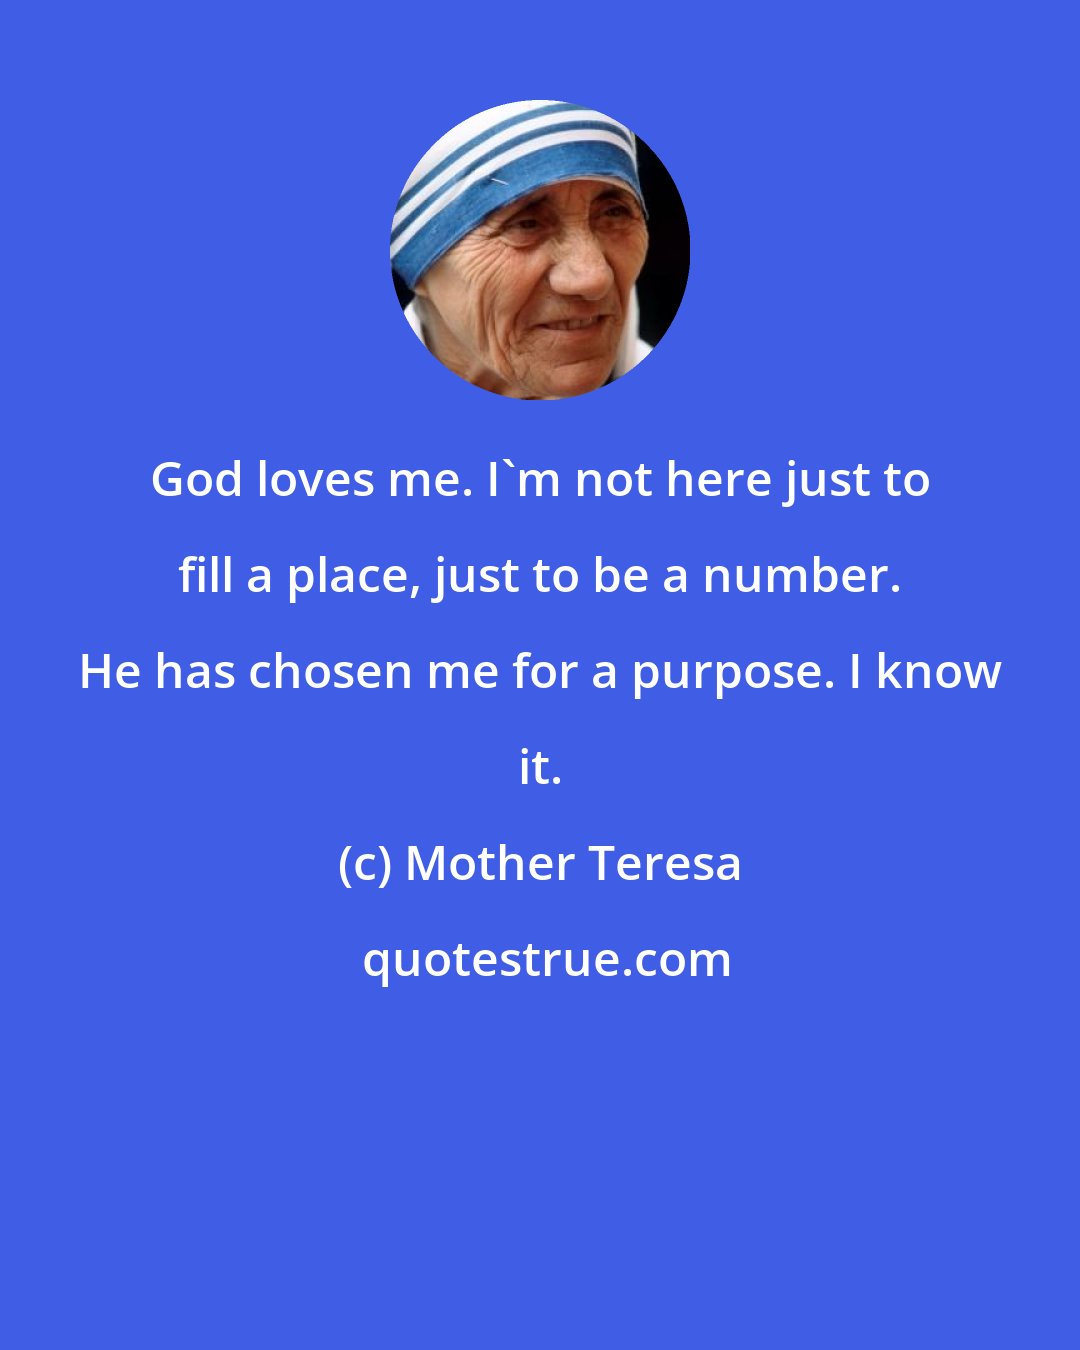 Mother Teresa: God loves me. I'm not here just to fill a place, just to be a number. He has chosen me for a purpose. I know it.